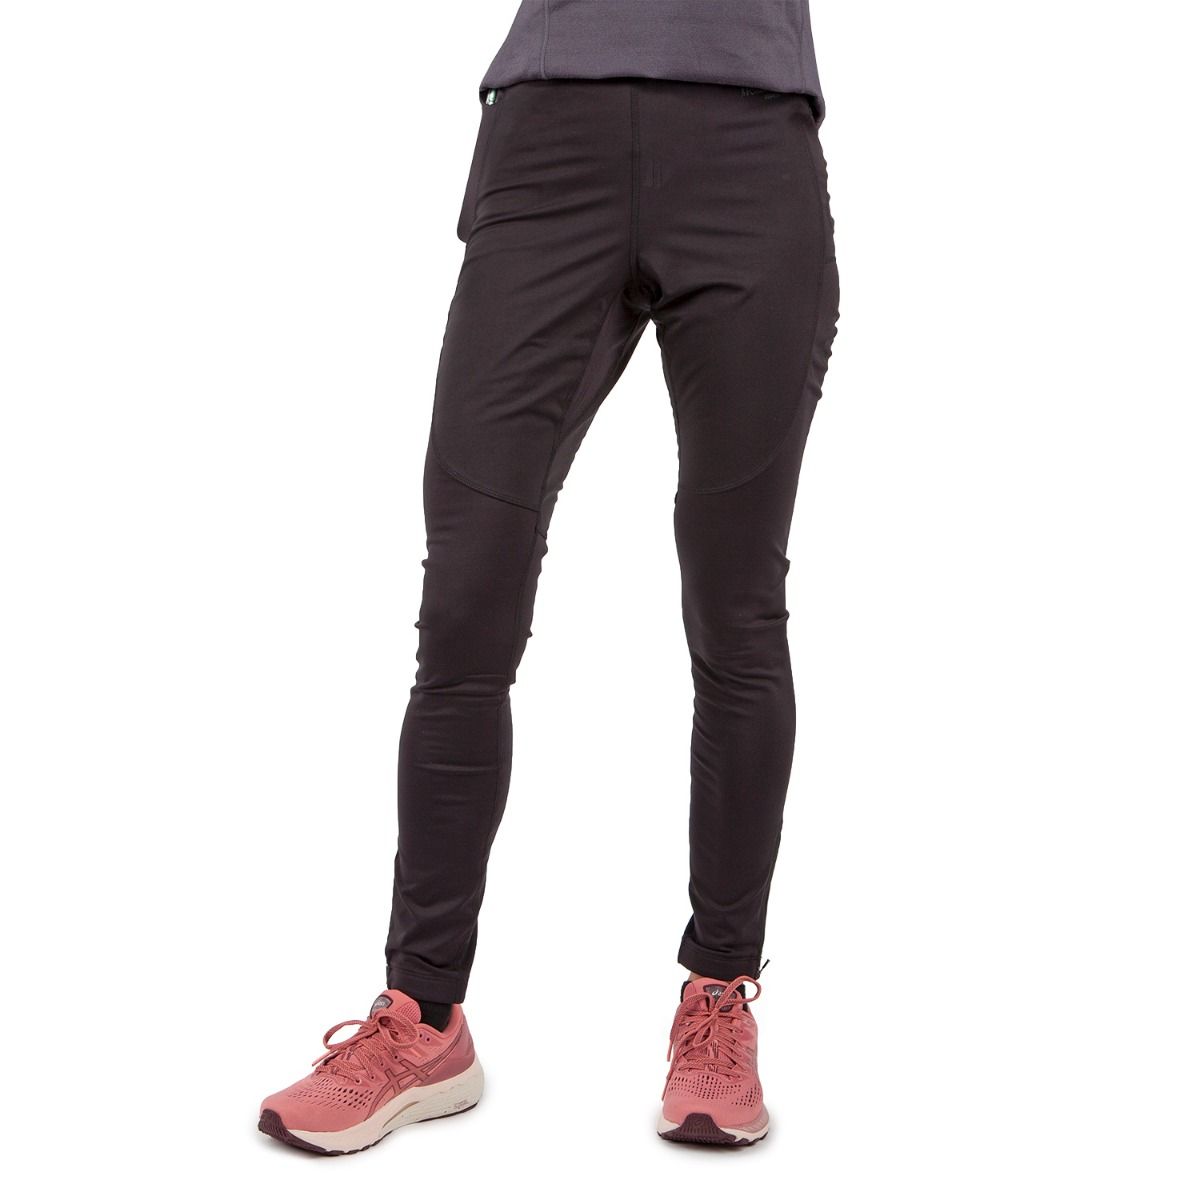 Women's Run Visible Thermal Tight, Running Gear for Women